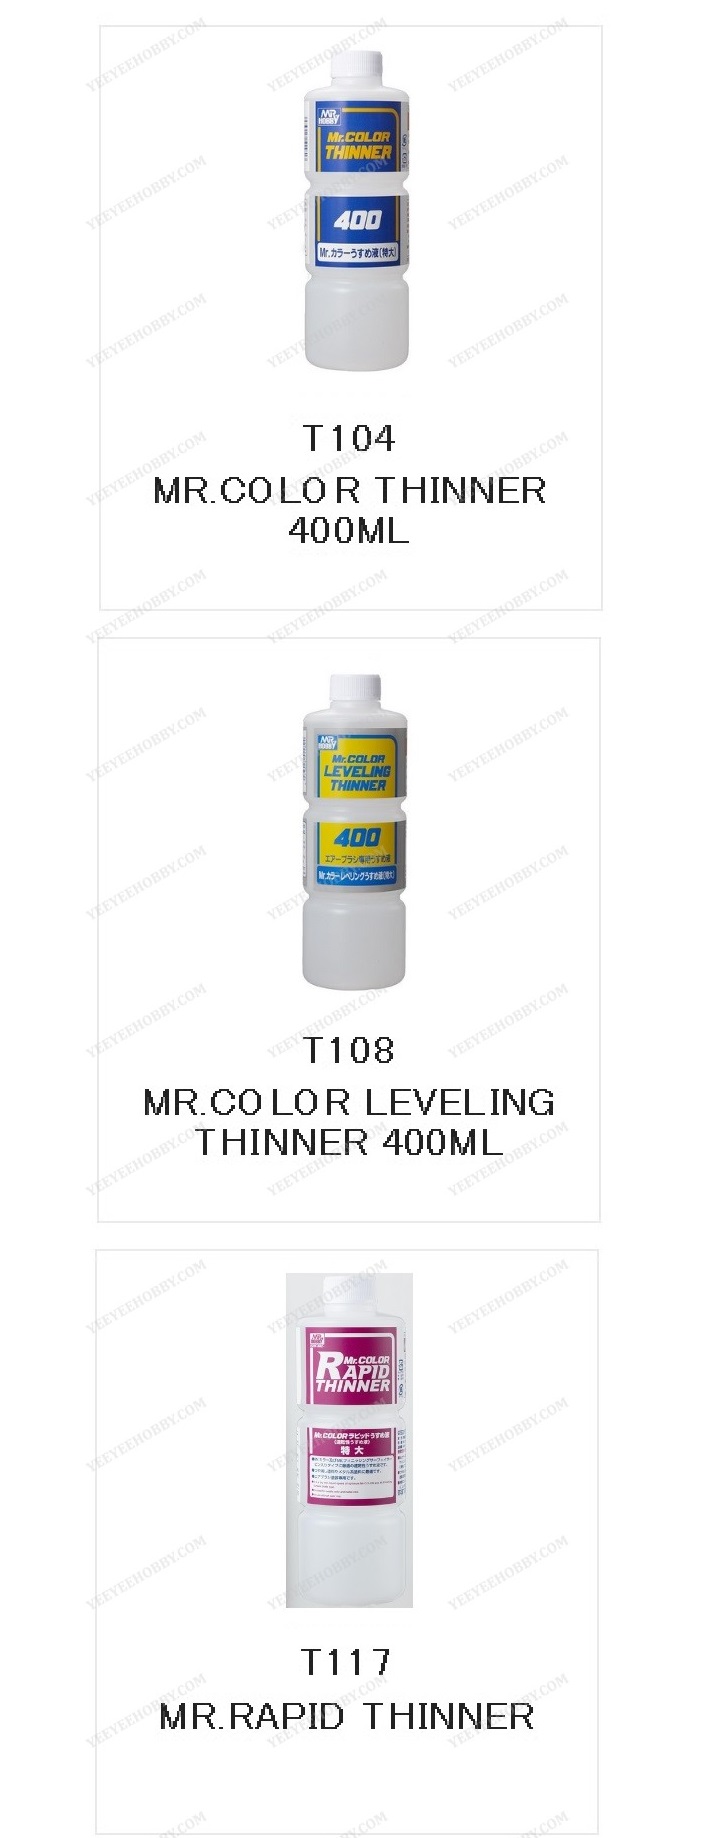 DUNG MÔI MR HOBBY LACQUER THINNER